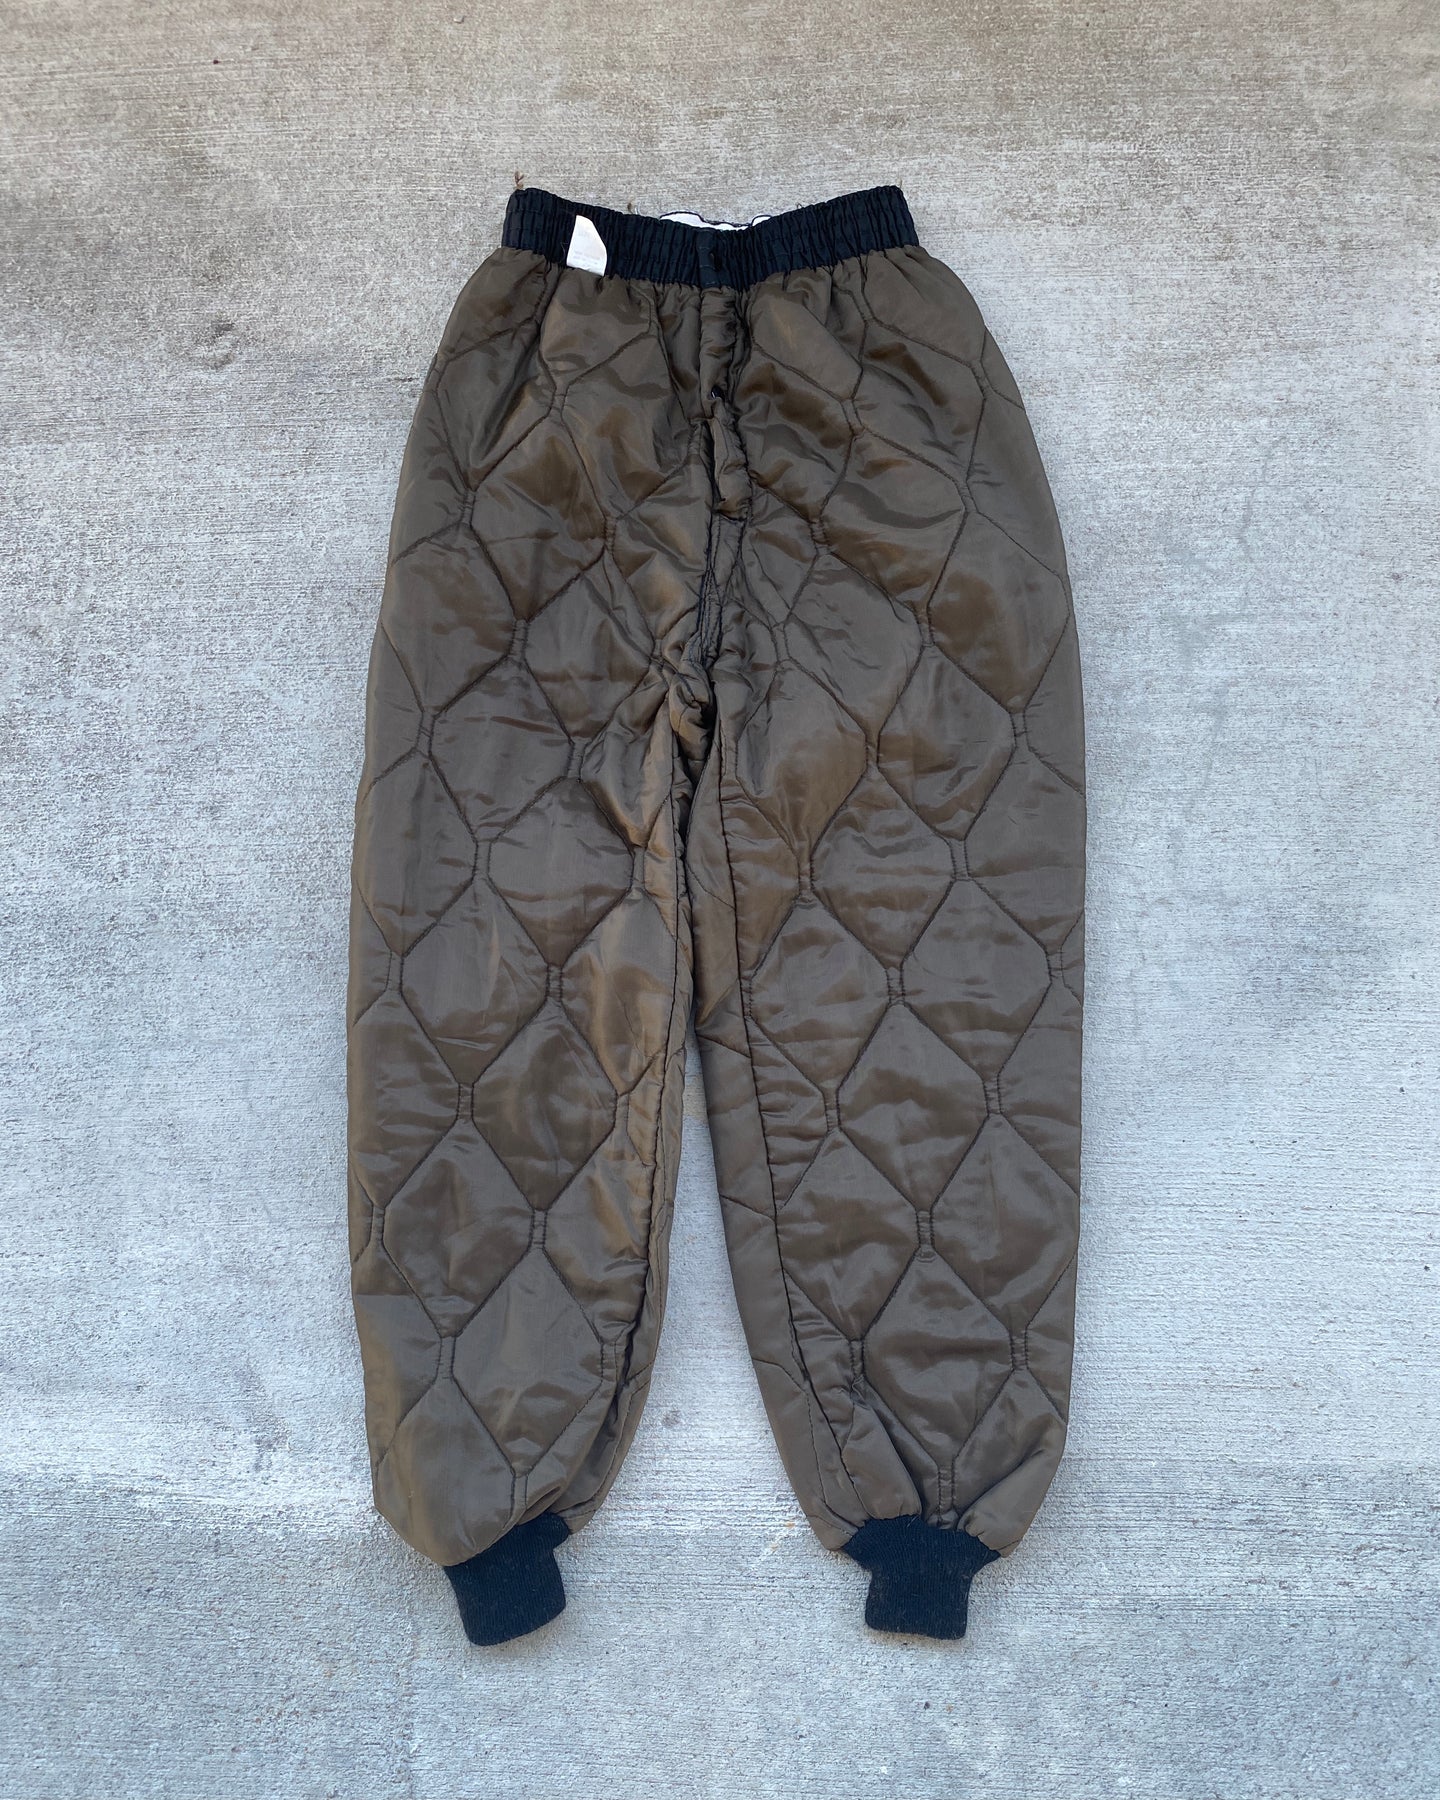 1980s Quilted Military Liner Pants - Size Small